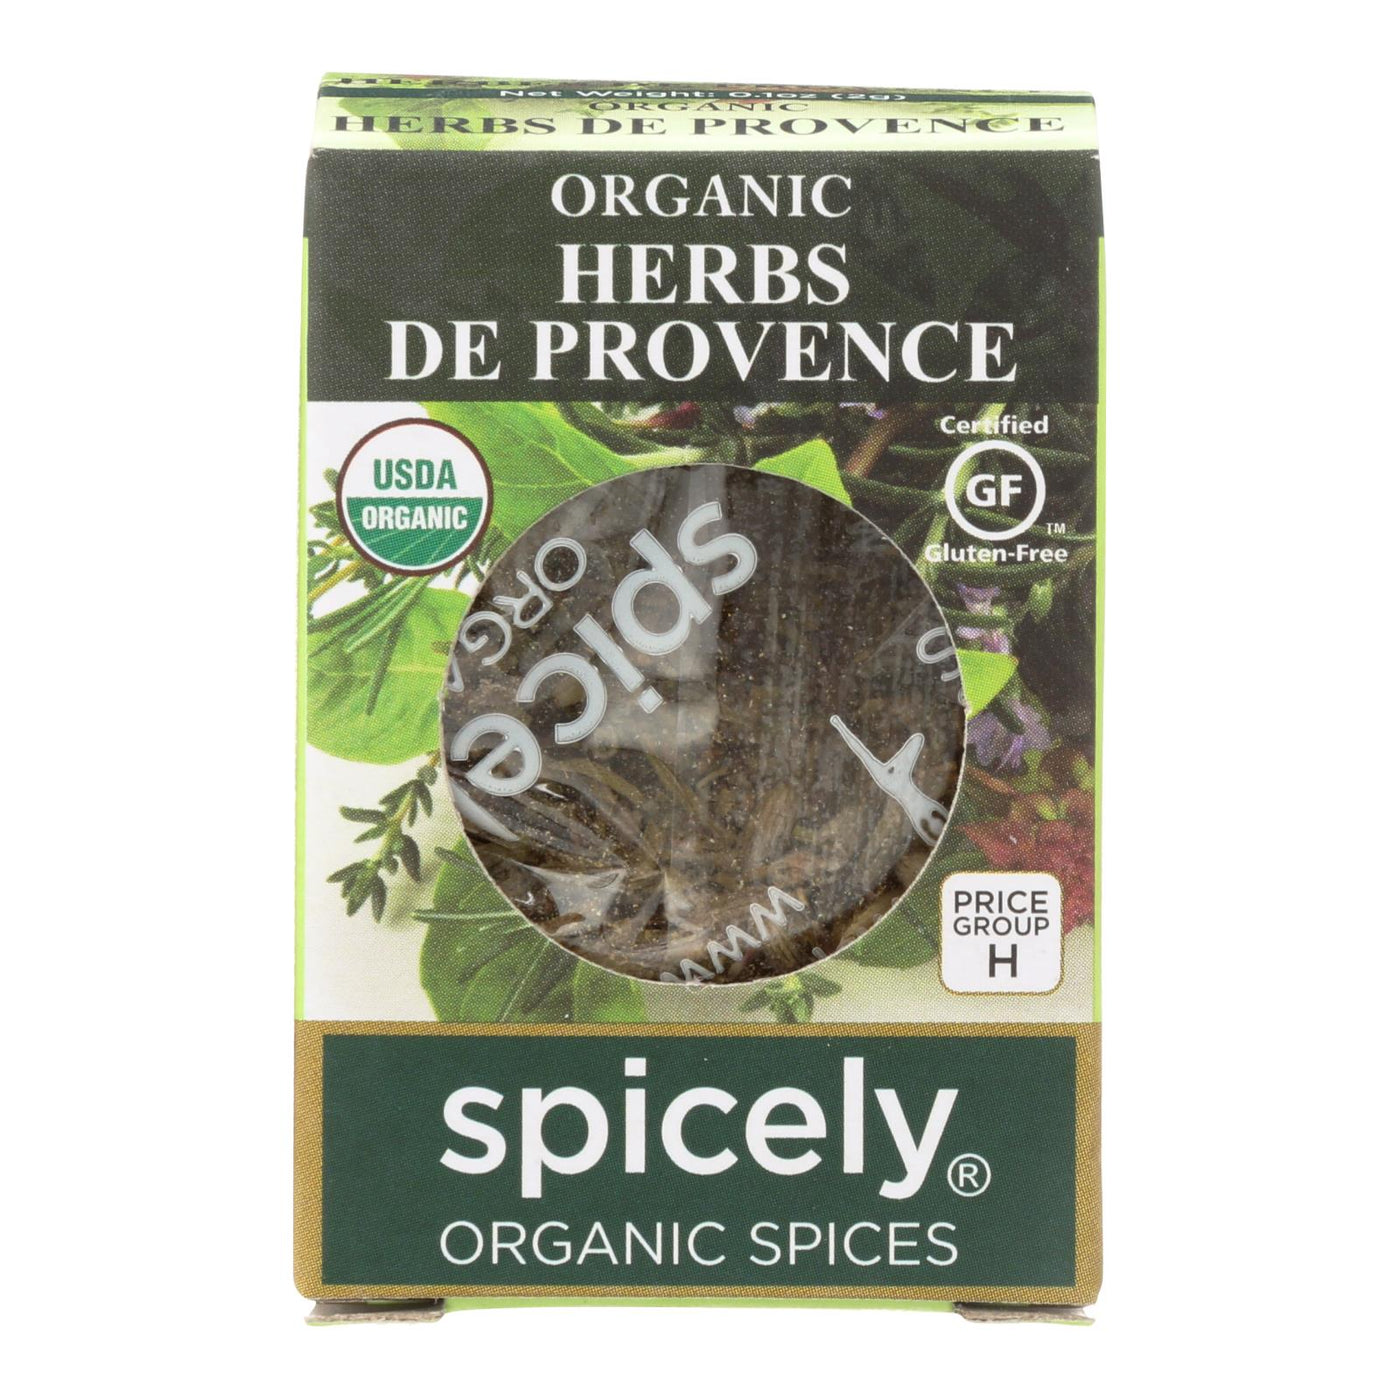 Spicely Organics - Organic Herbs De Provence Seasoning - Case Of 6 - 0.1 Oz. | OnlyNaturals.us